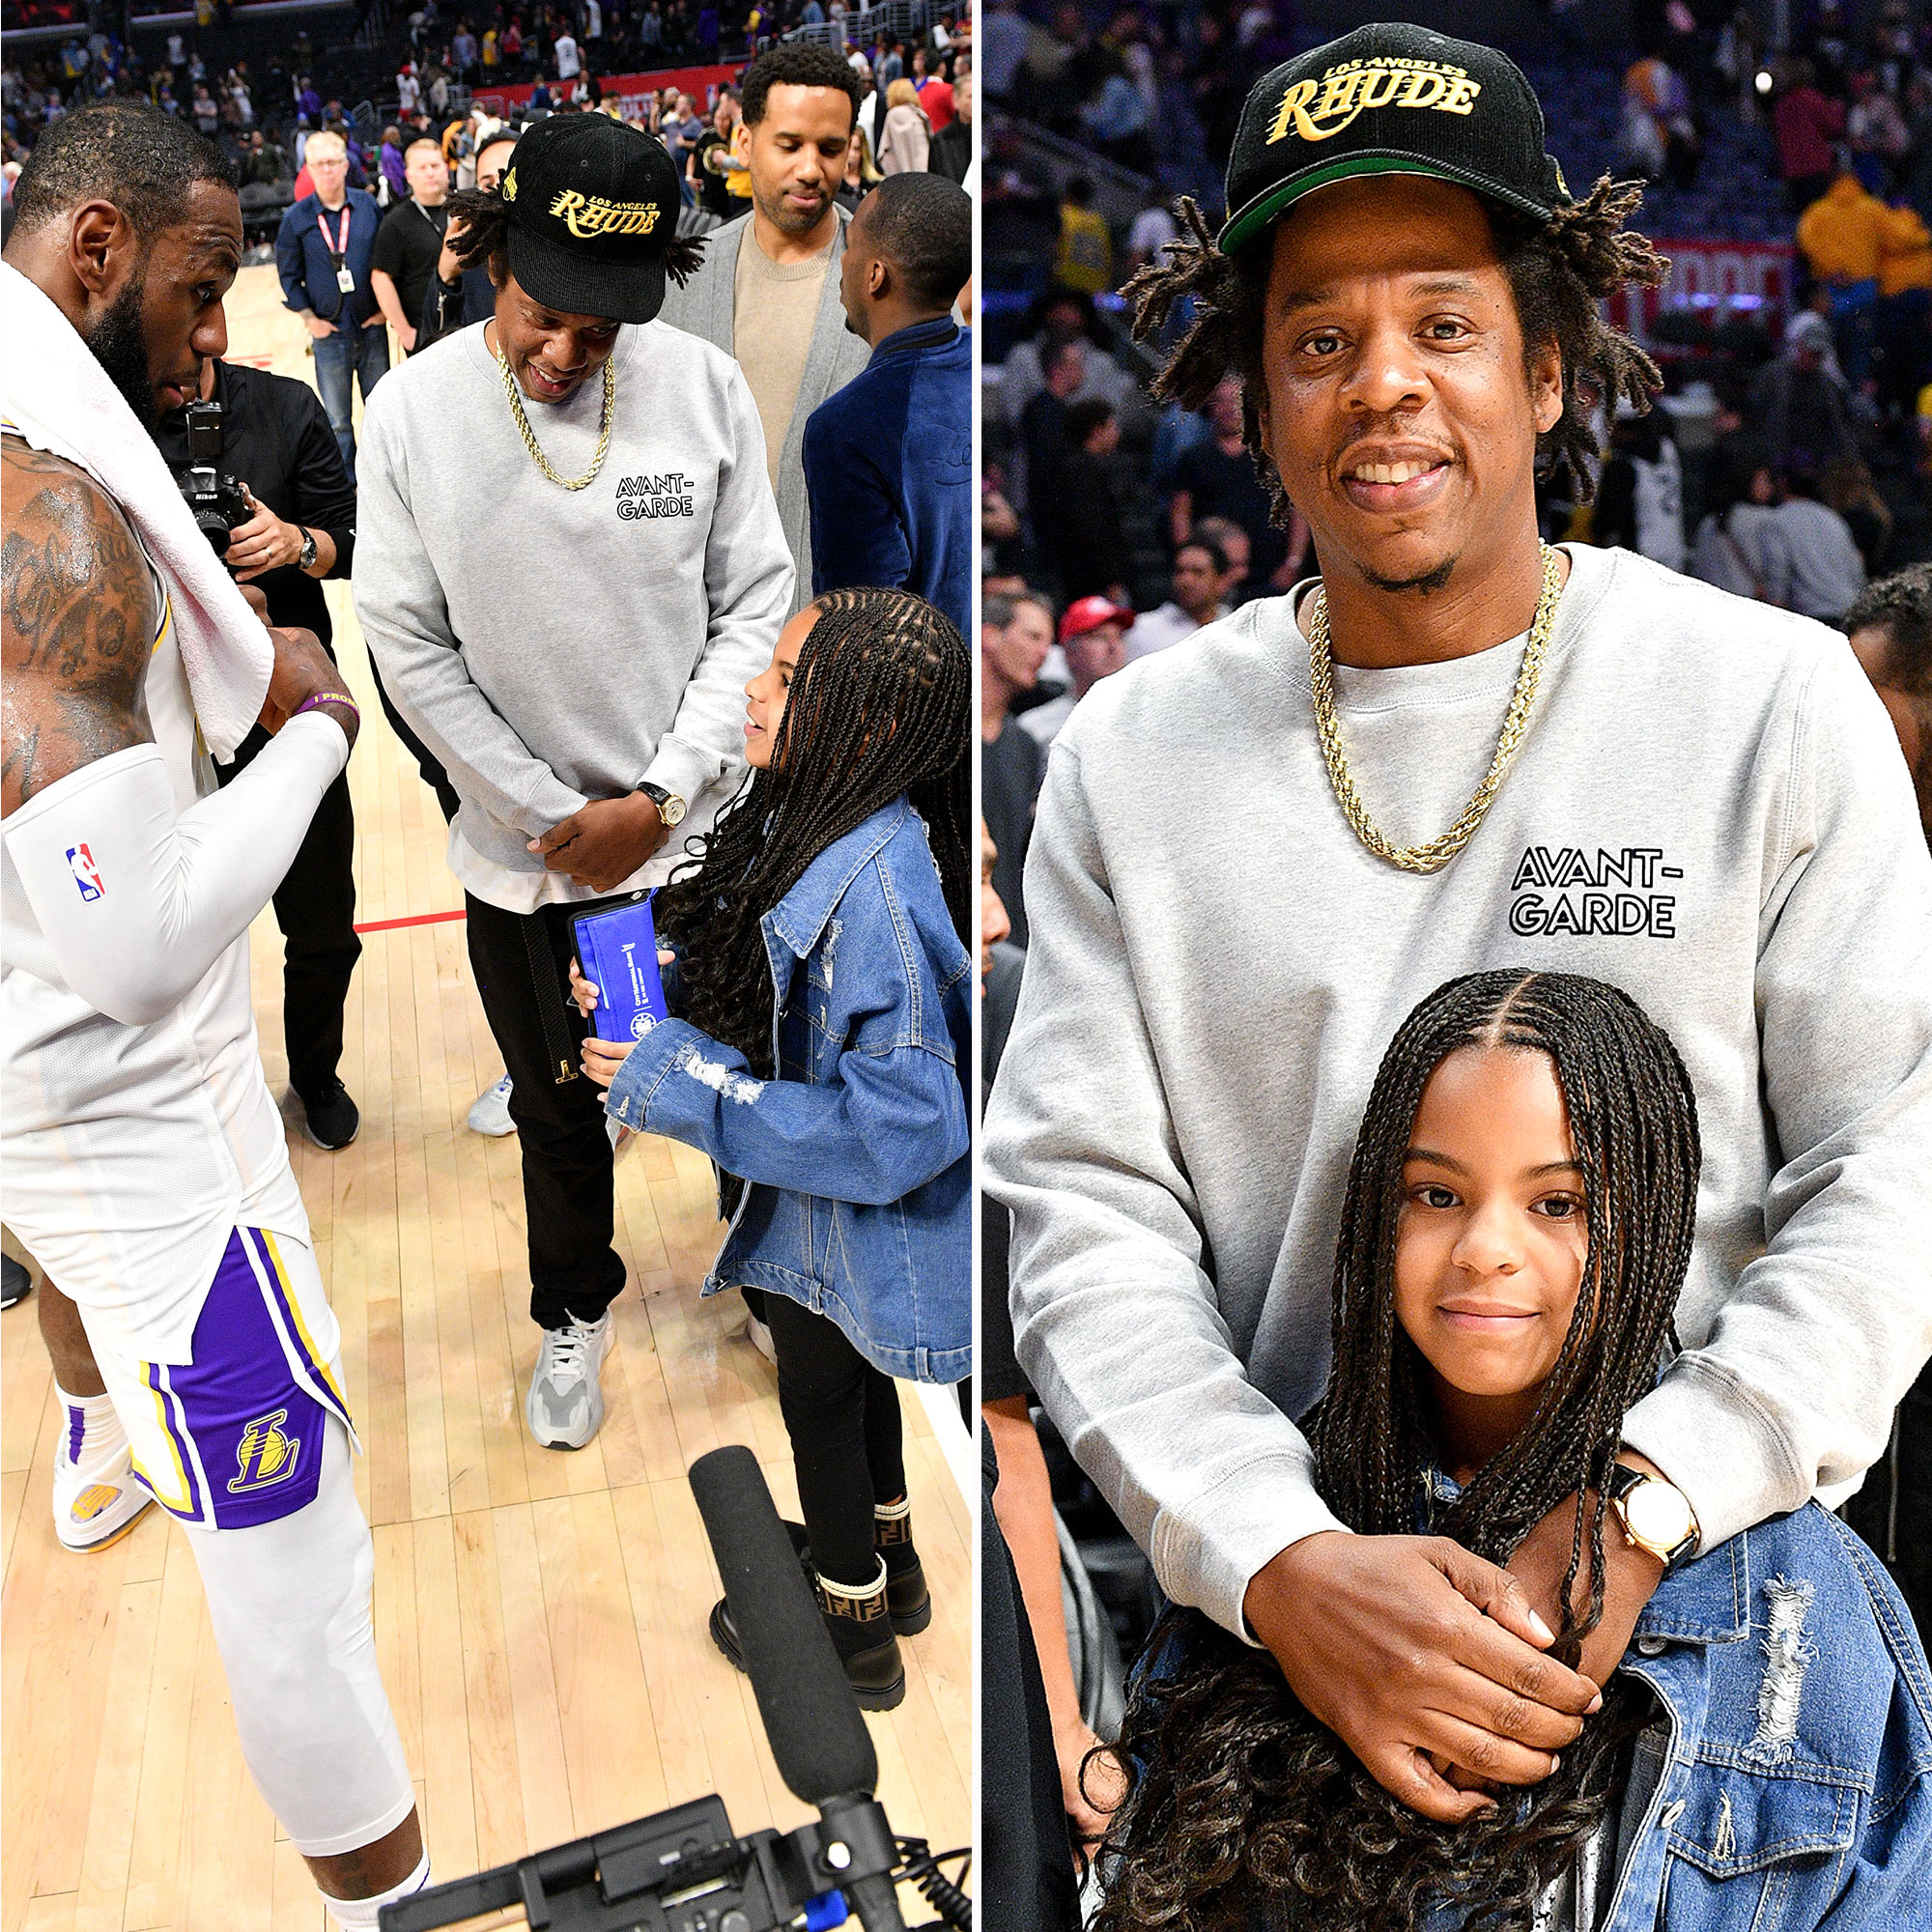 Blue Ivy Has With Weekly Attending Us NBA Pics Jay-Z: | Game Fun Dad